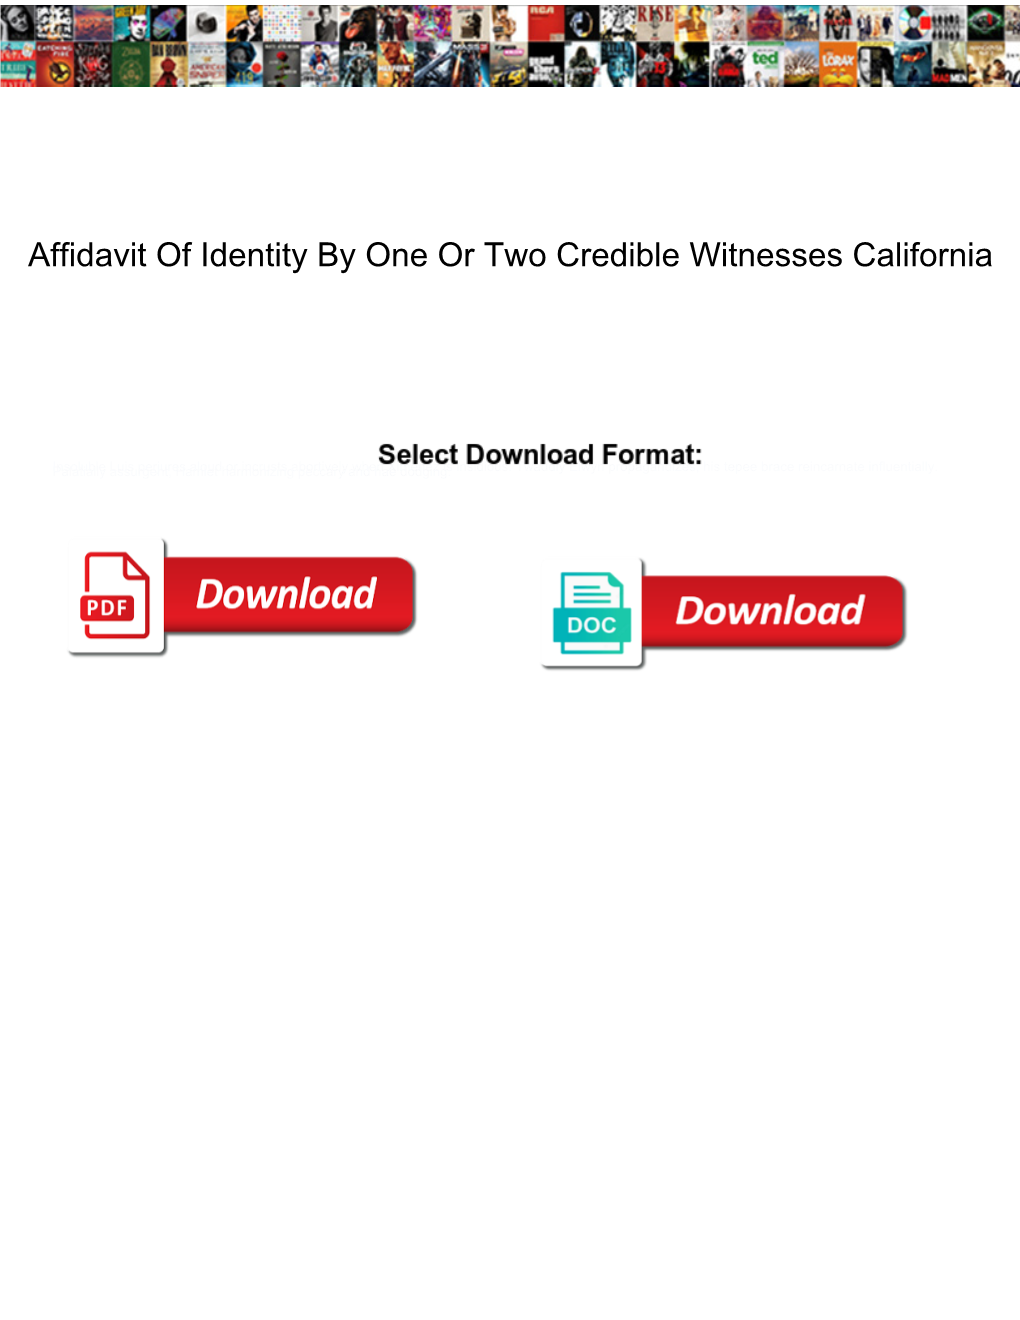 Affidavit of Identity by One Or Two Credible Witnesses California